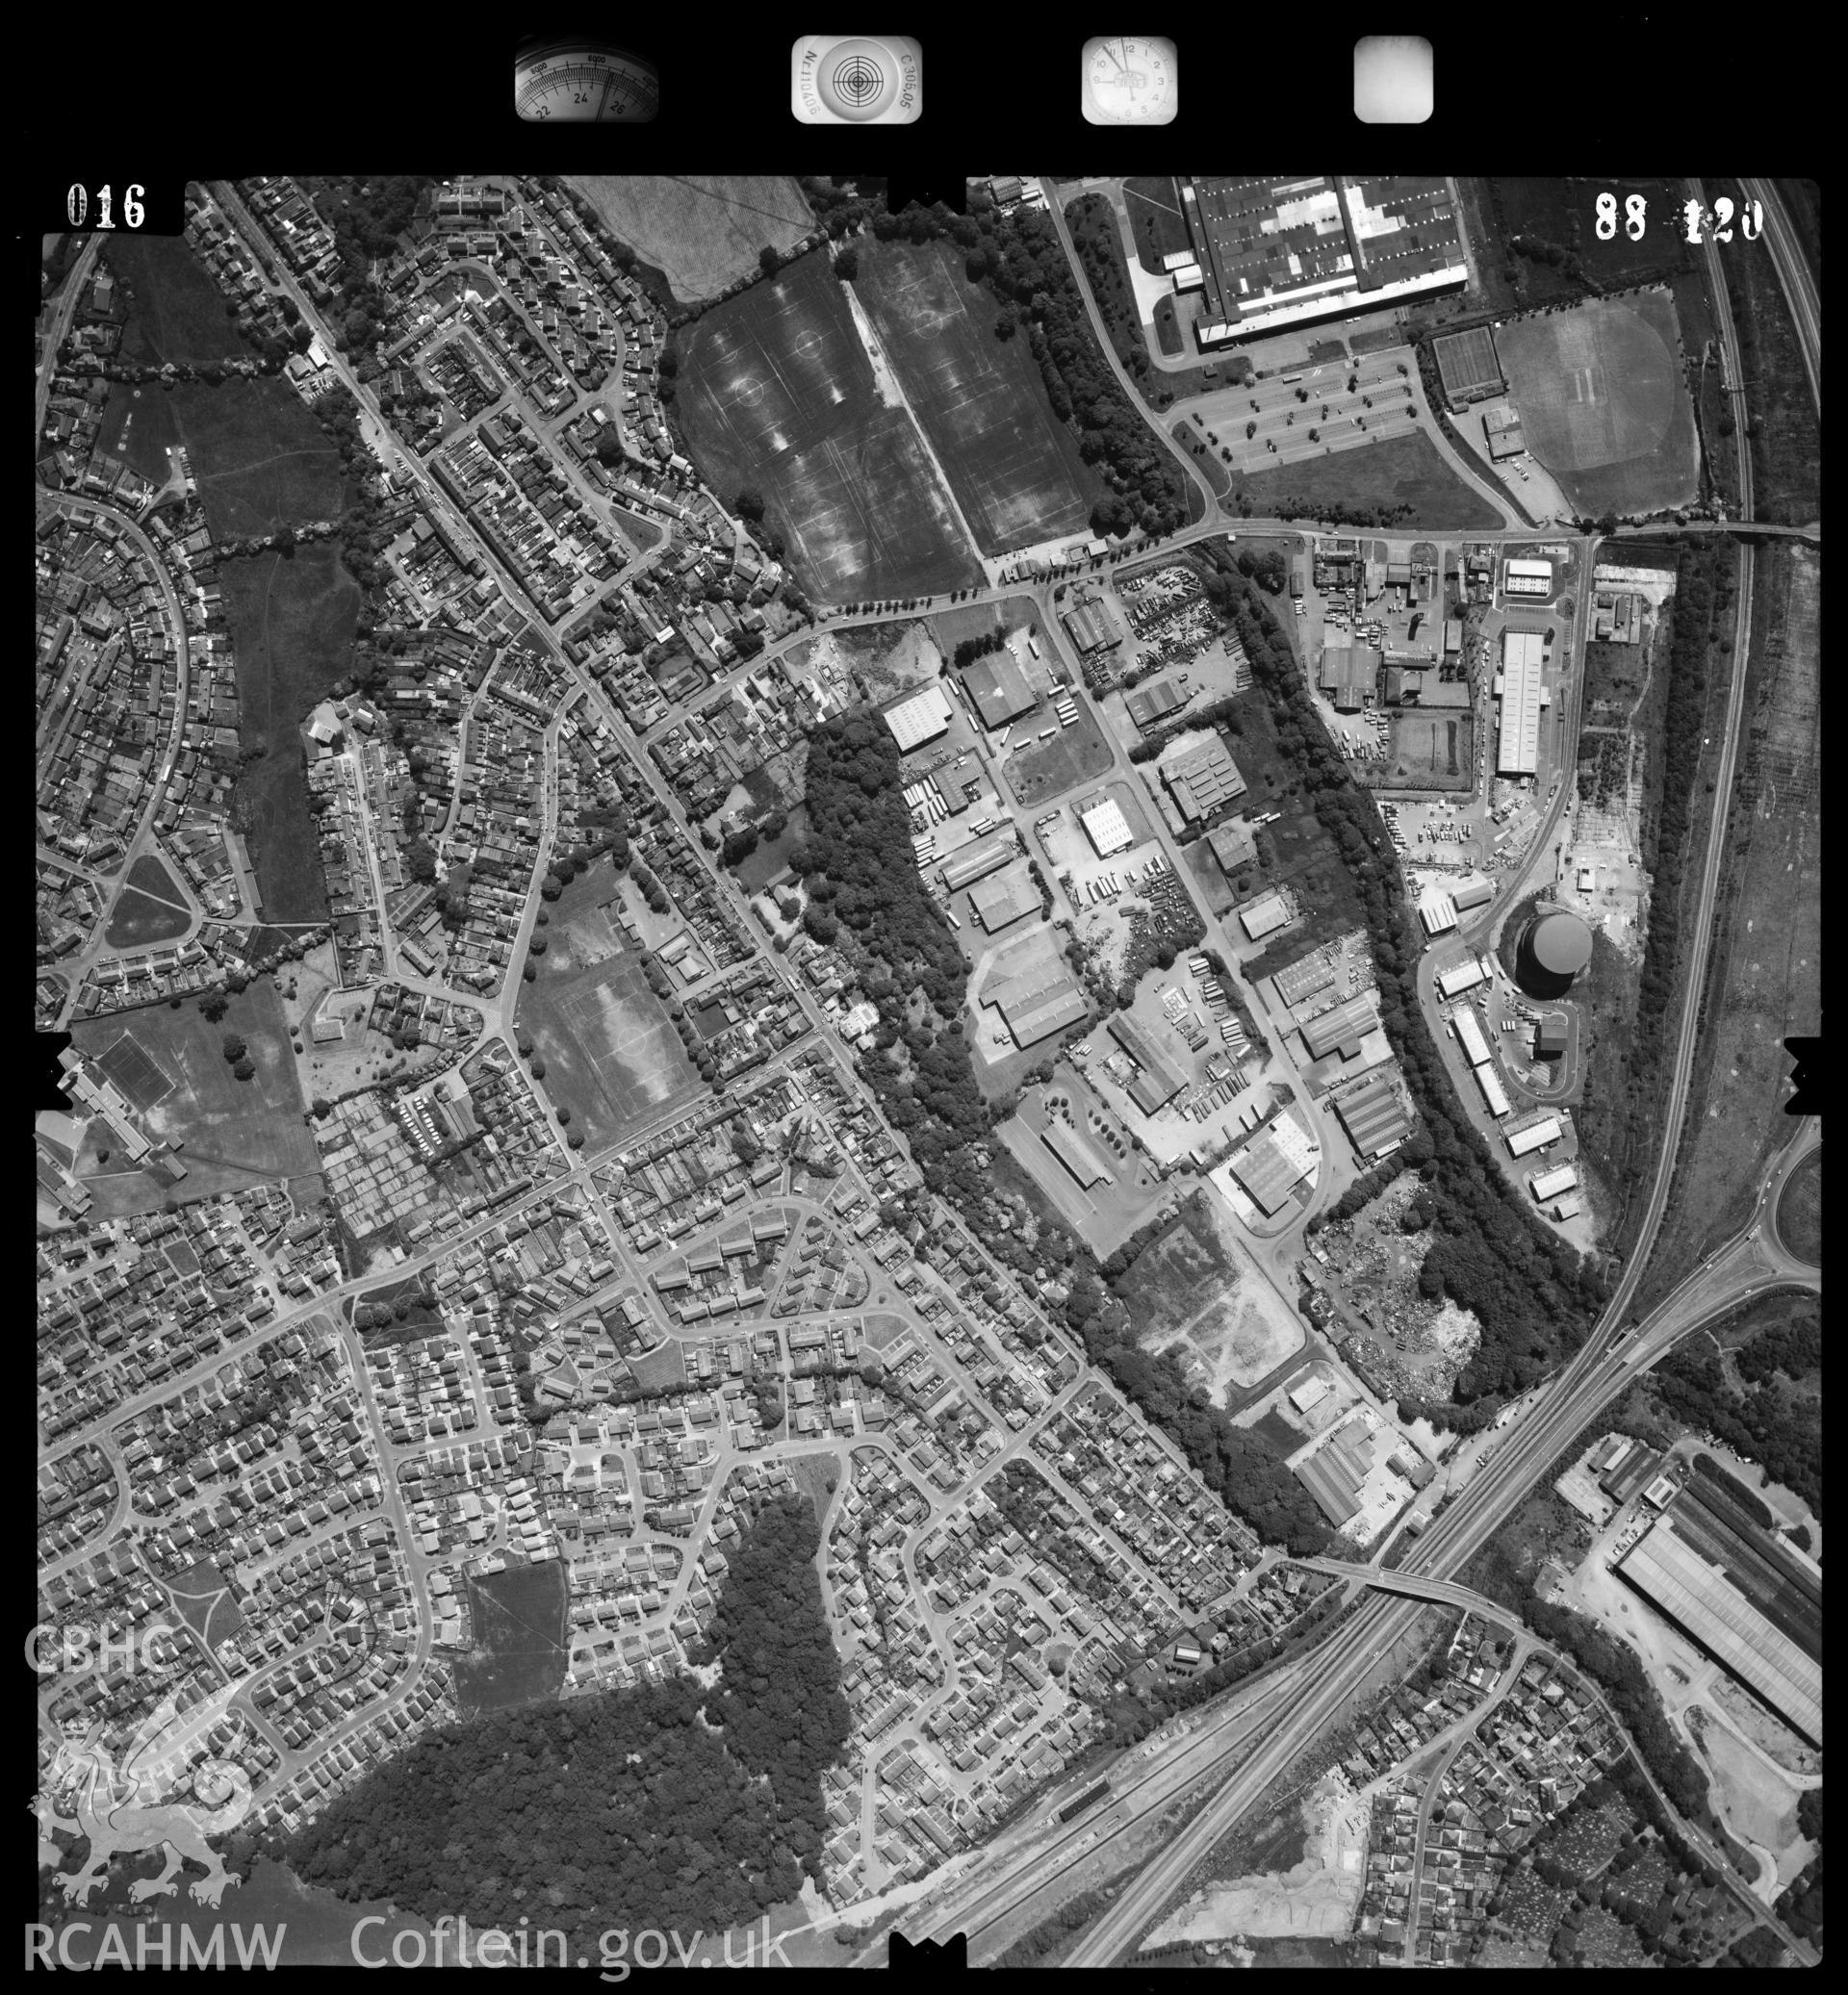 Digitized copy of an aerial photograph showing Pontypool area, taken by Ordnance Survey, 1988.